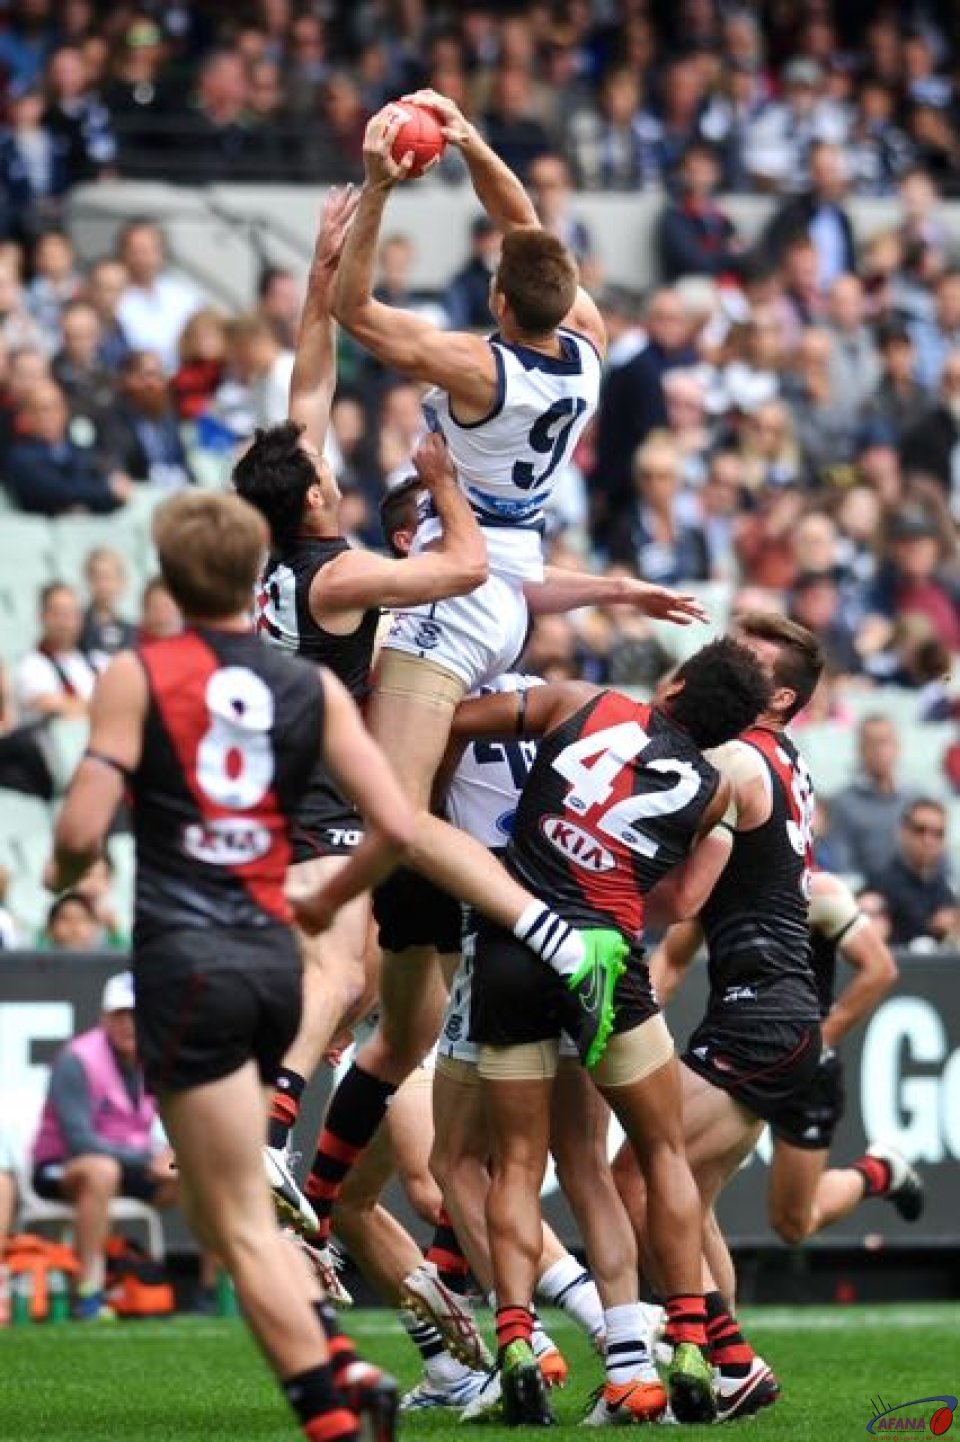 Zac Smith (9) takes a contested mark in the Cats forward fifty